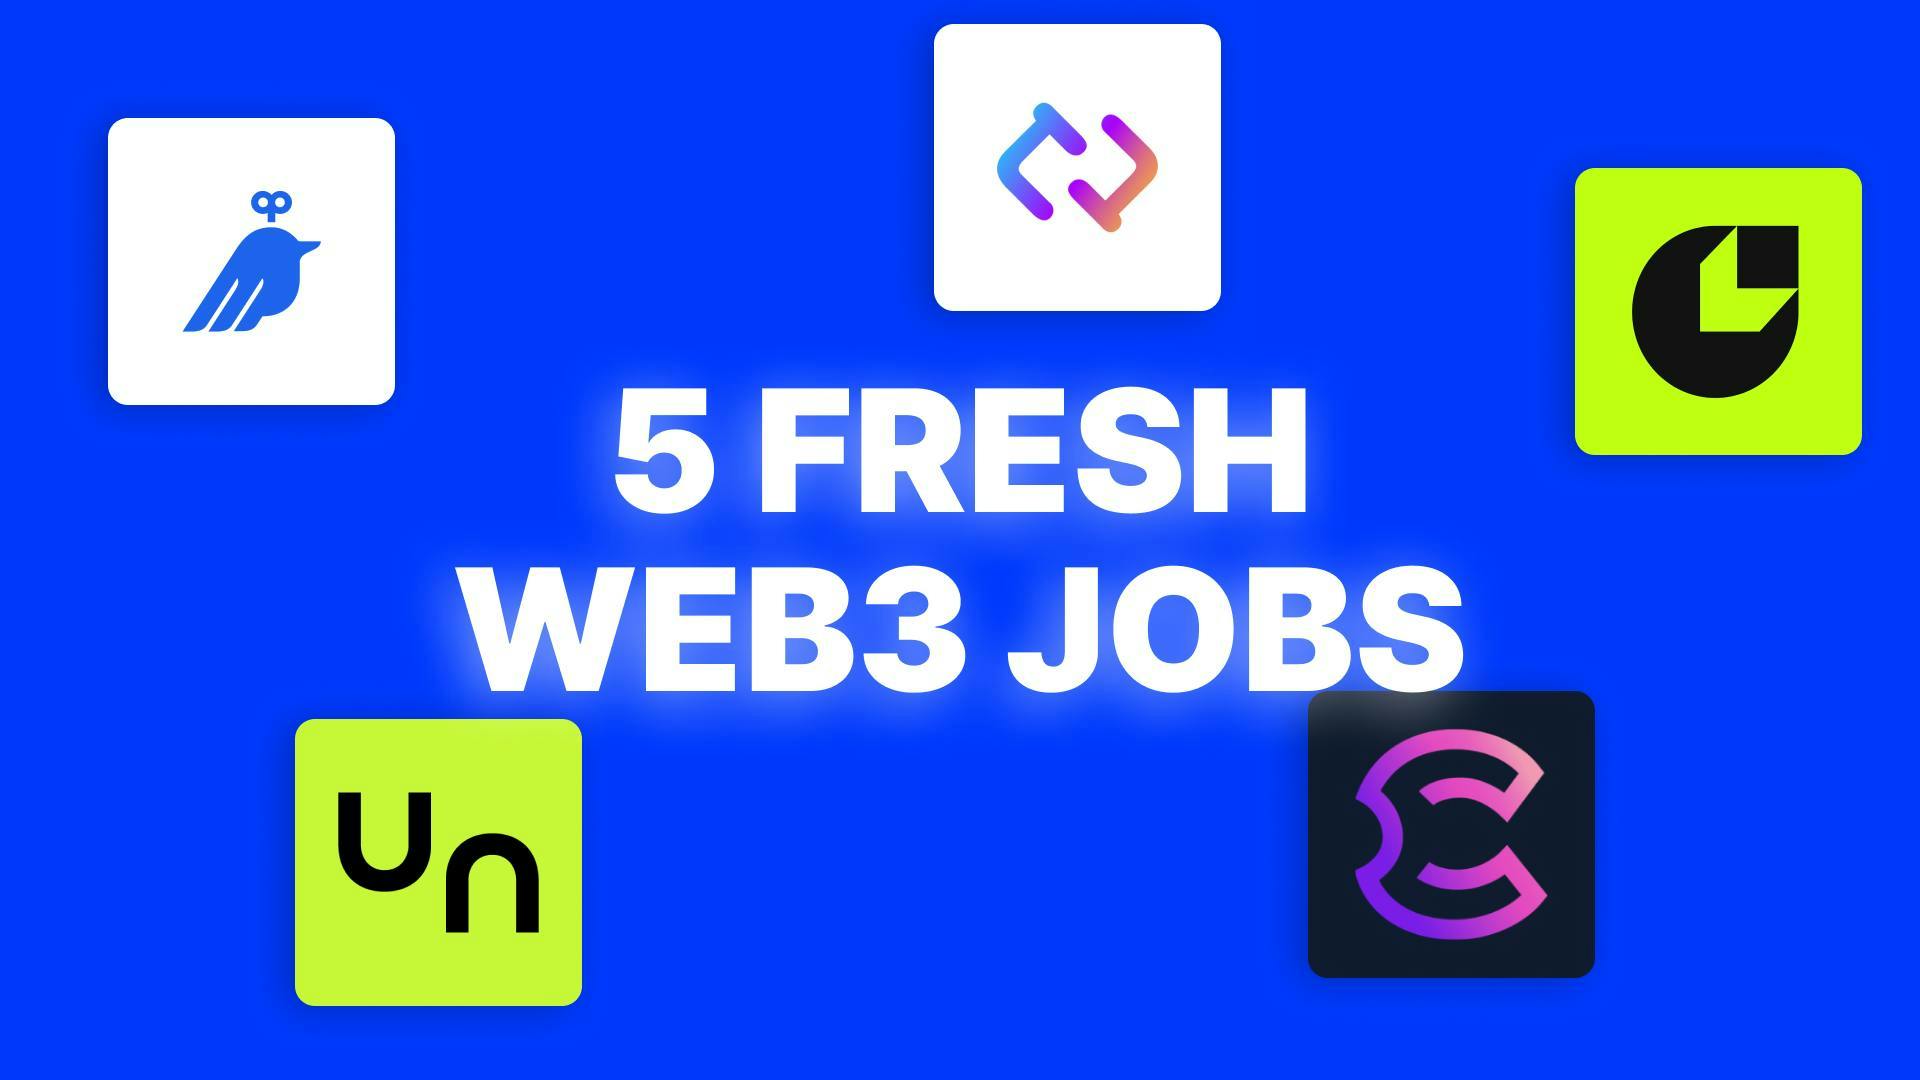 5 Fresh Web3 Jobs Posted Today